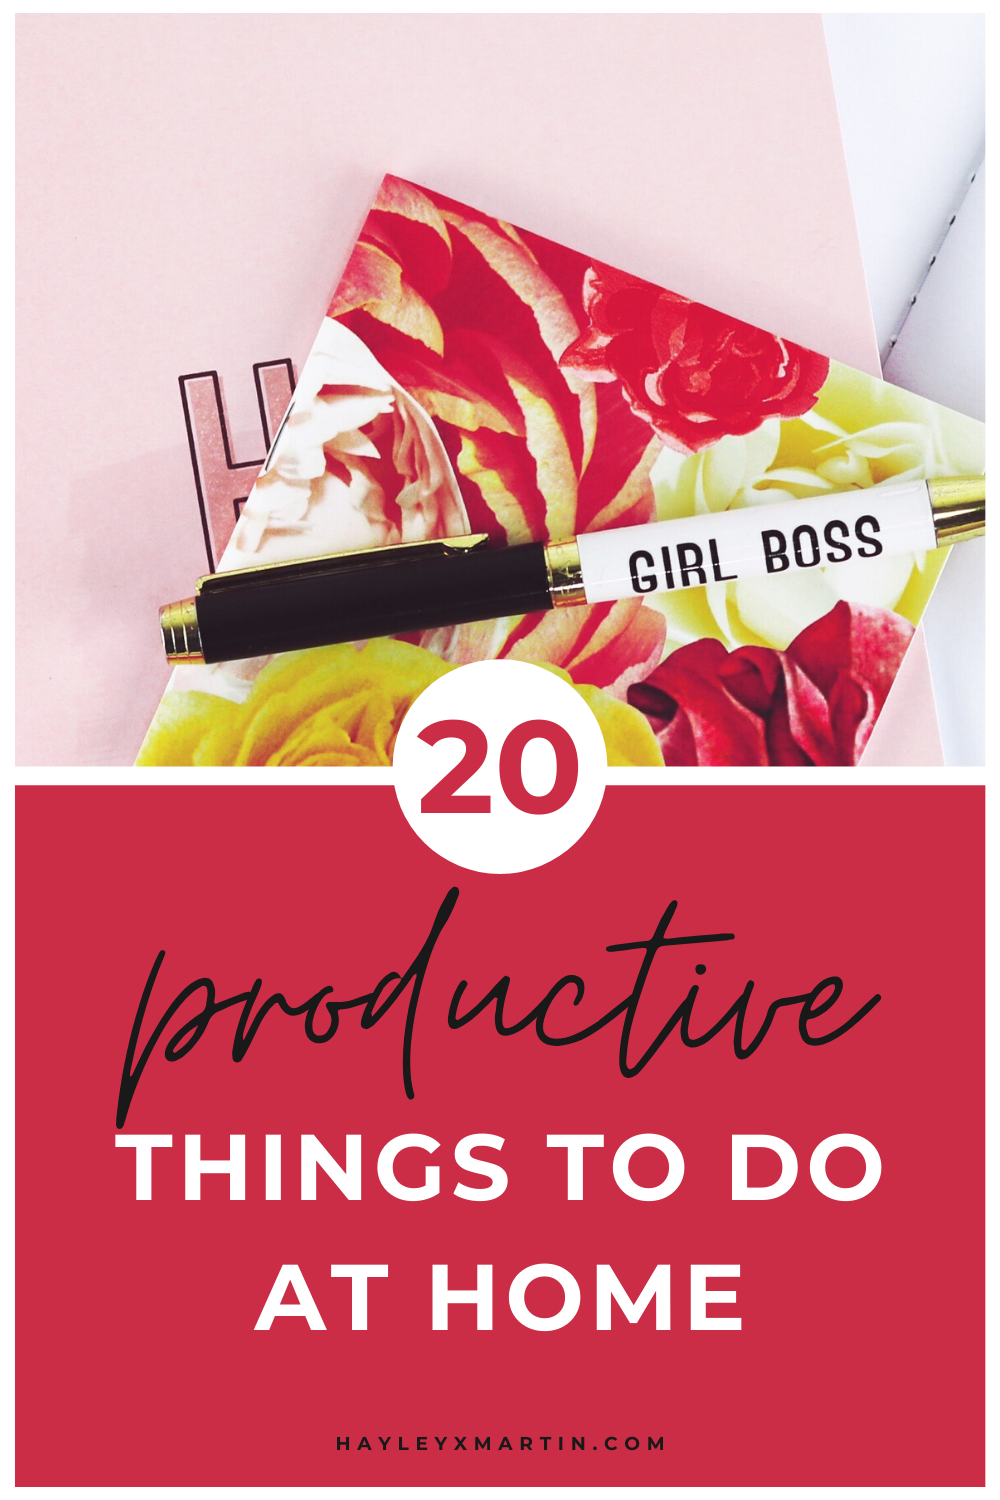 20 productive things to do at home | hayleyxmartin